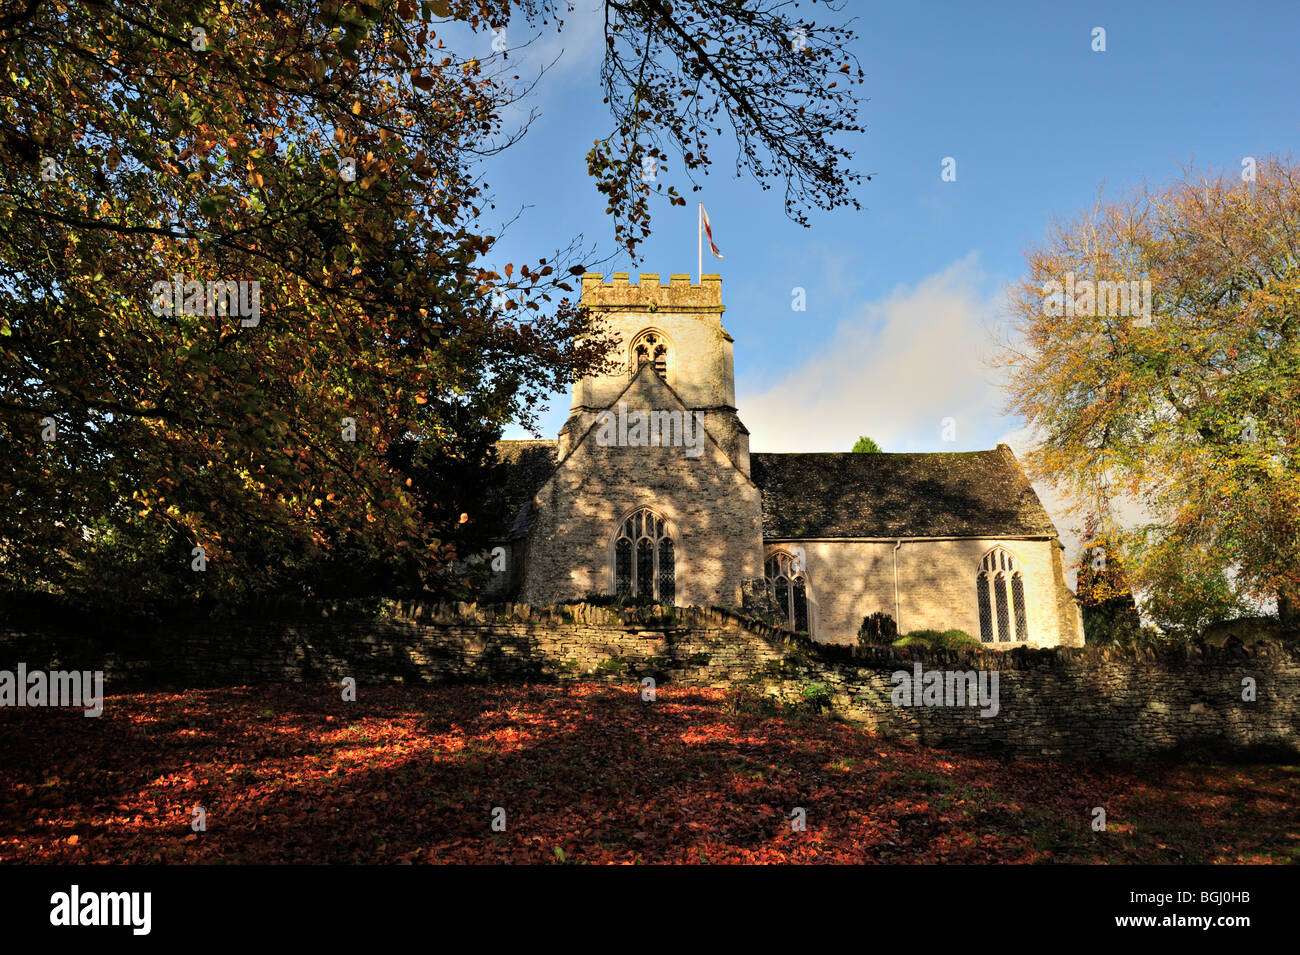 MINSTER LOVELL, OXFORDSHIRE, UK -  NOVEMBER 03, 2009:  Exterior view of St Kenelm Church in the village Stock Photo